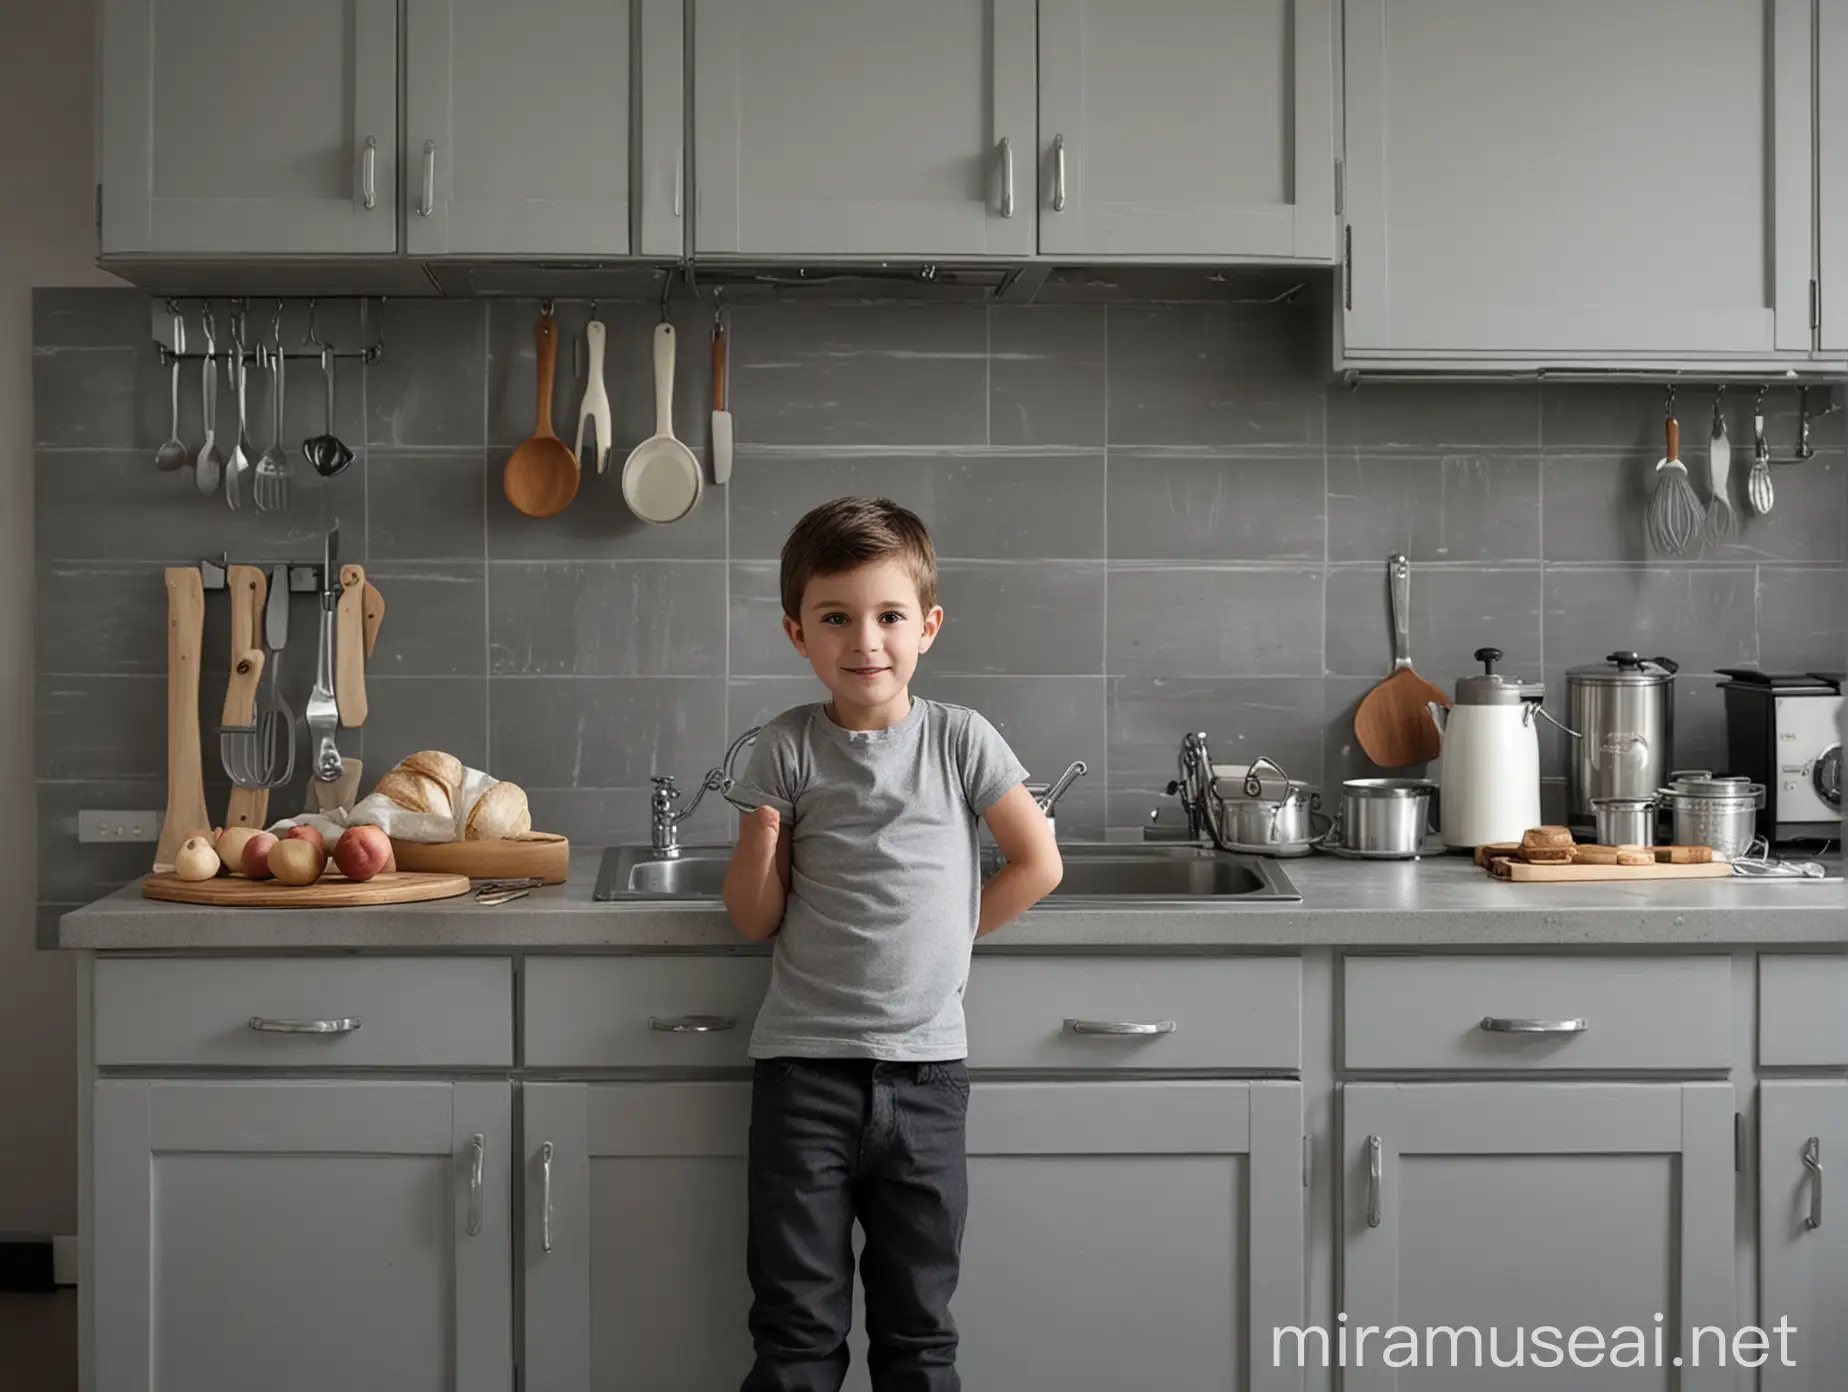 Enthusiastic Child Cooking in Monochrome Kitchen